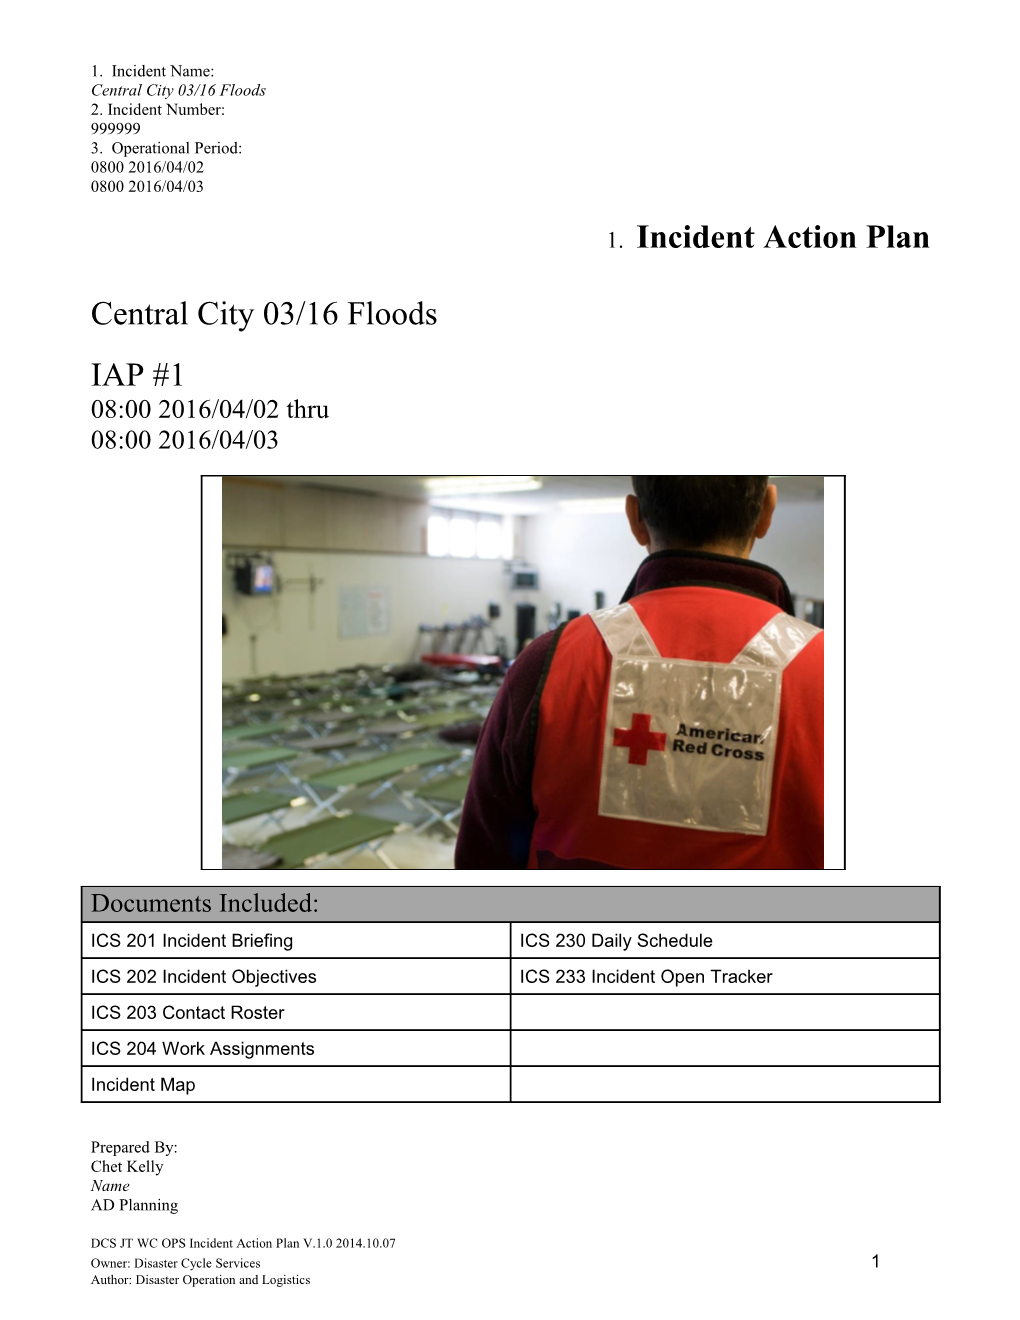 Incident Action Plan s5